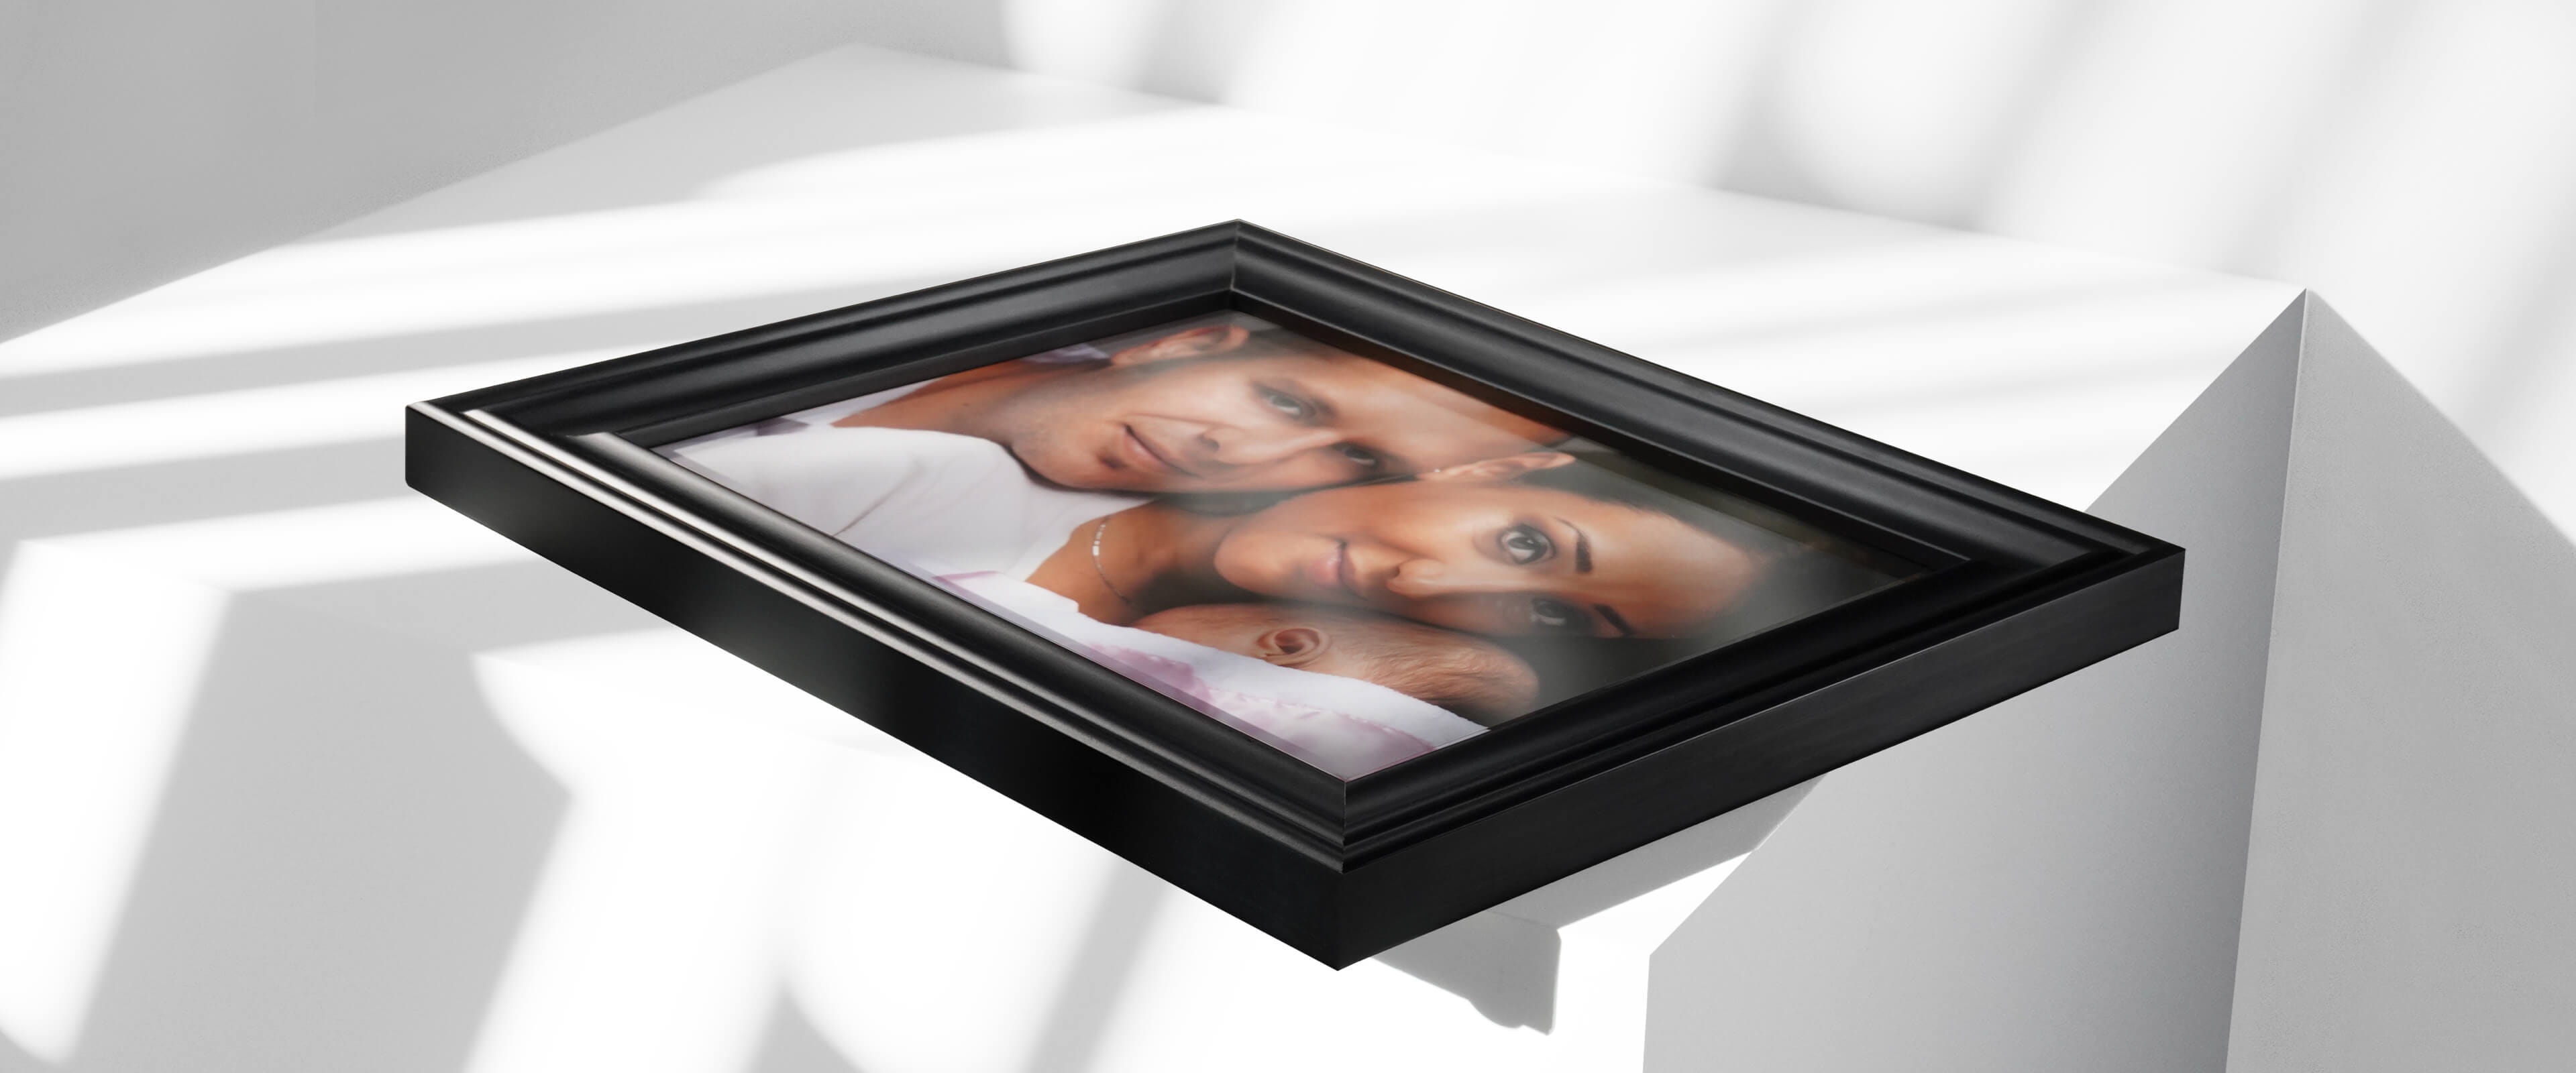 framed print on white table with photo of family holding baby